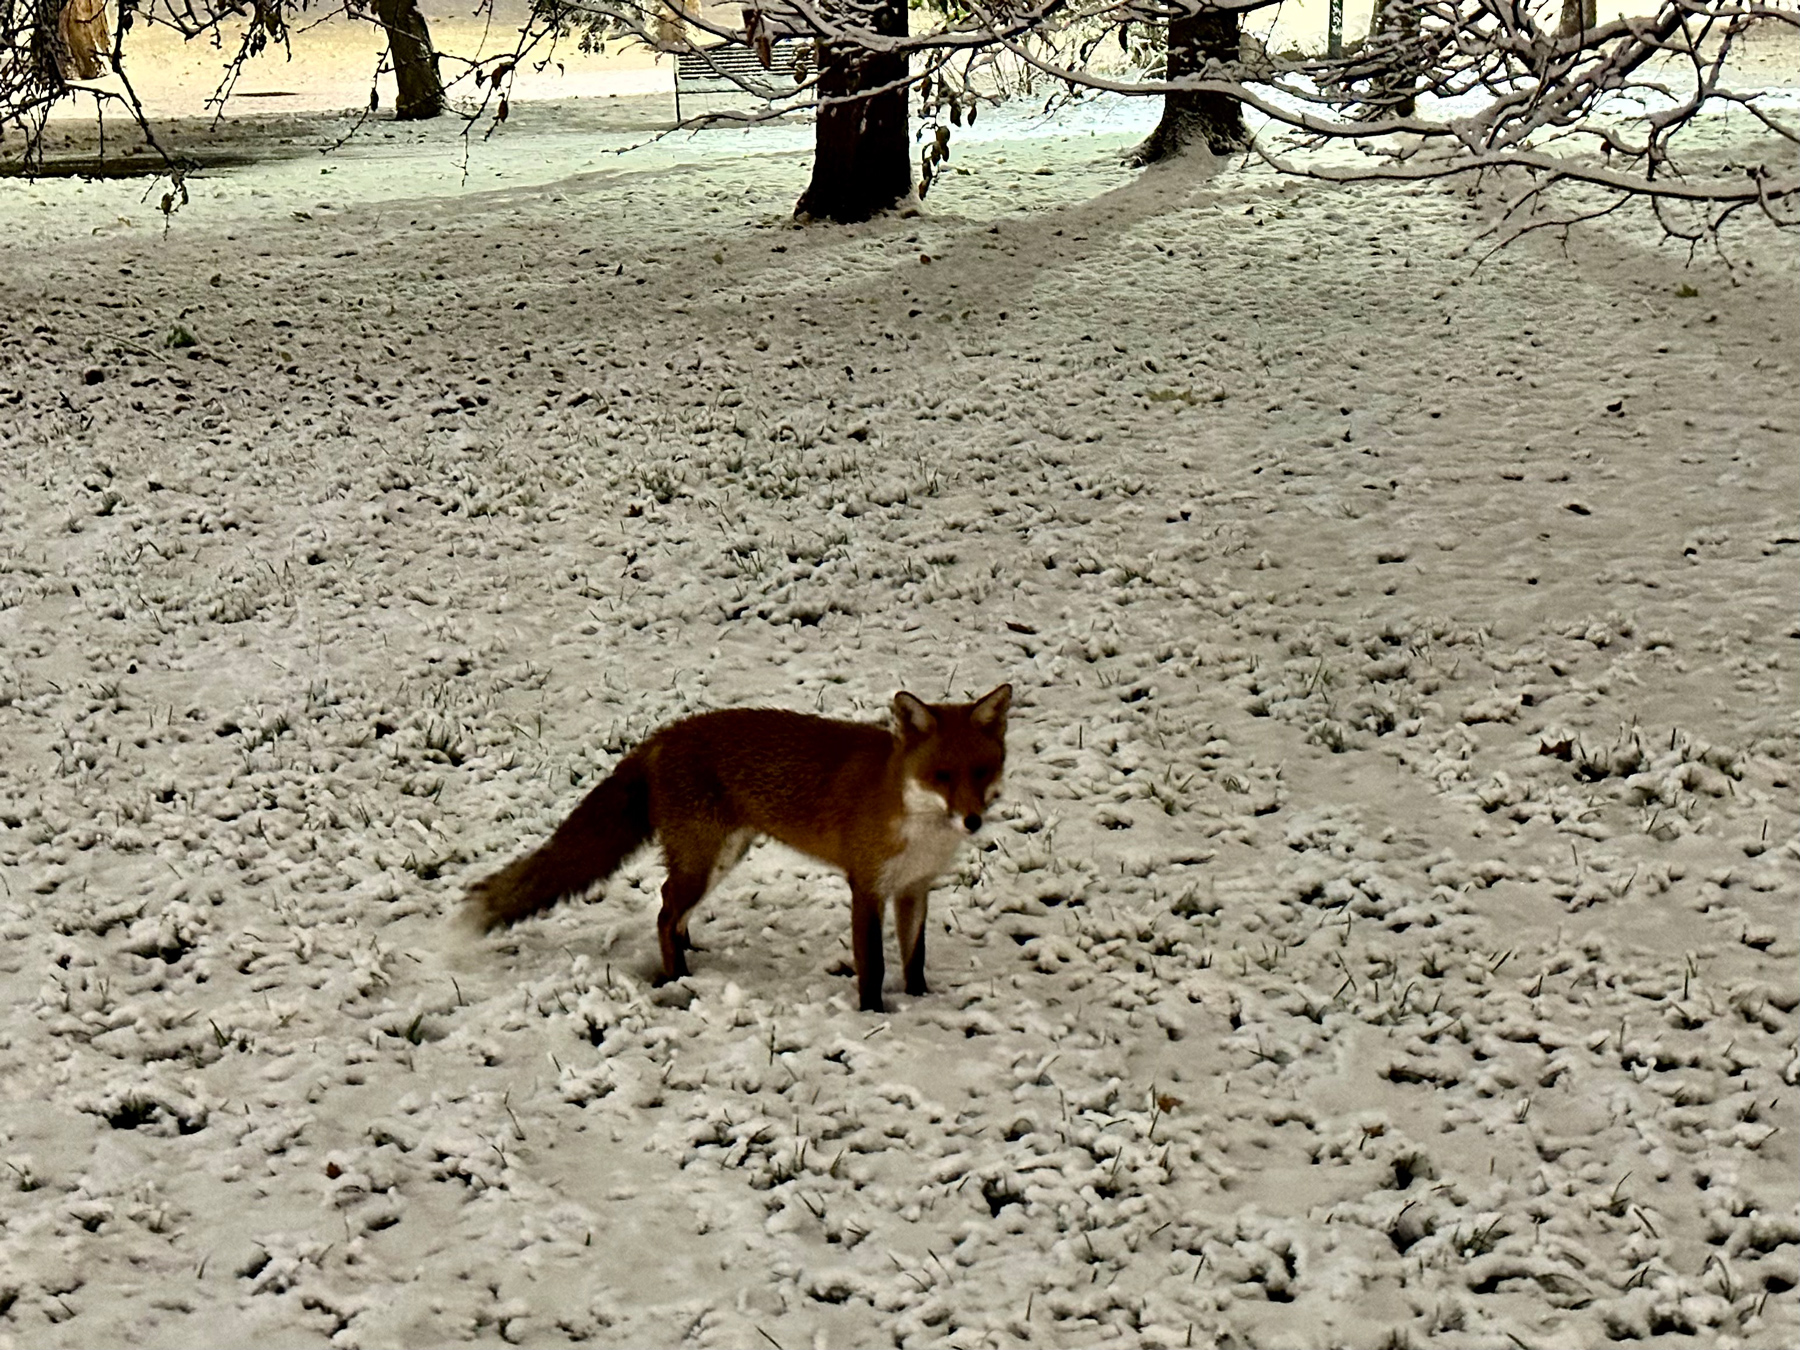 A friendly fox stood very close to us in the snow